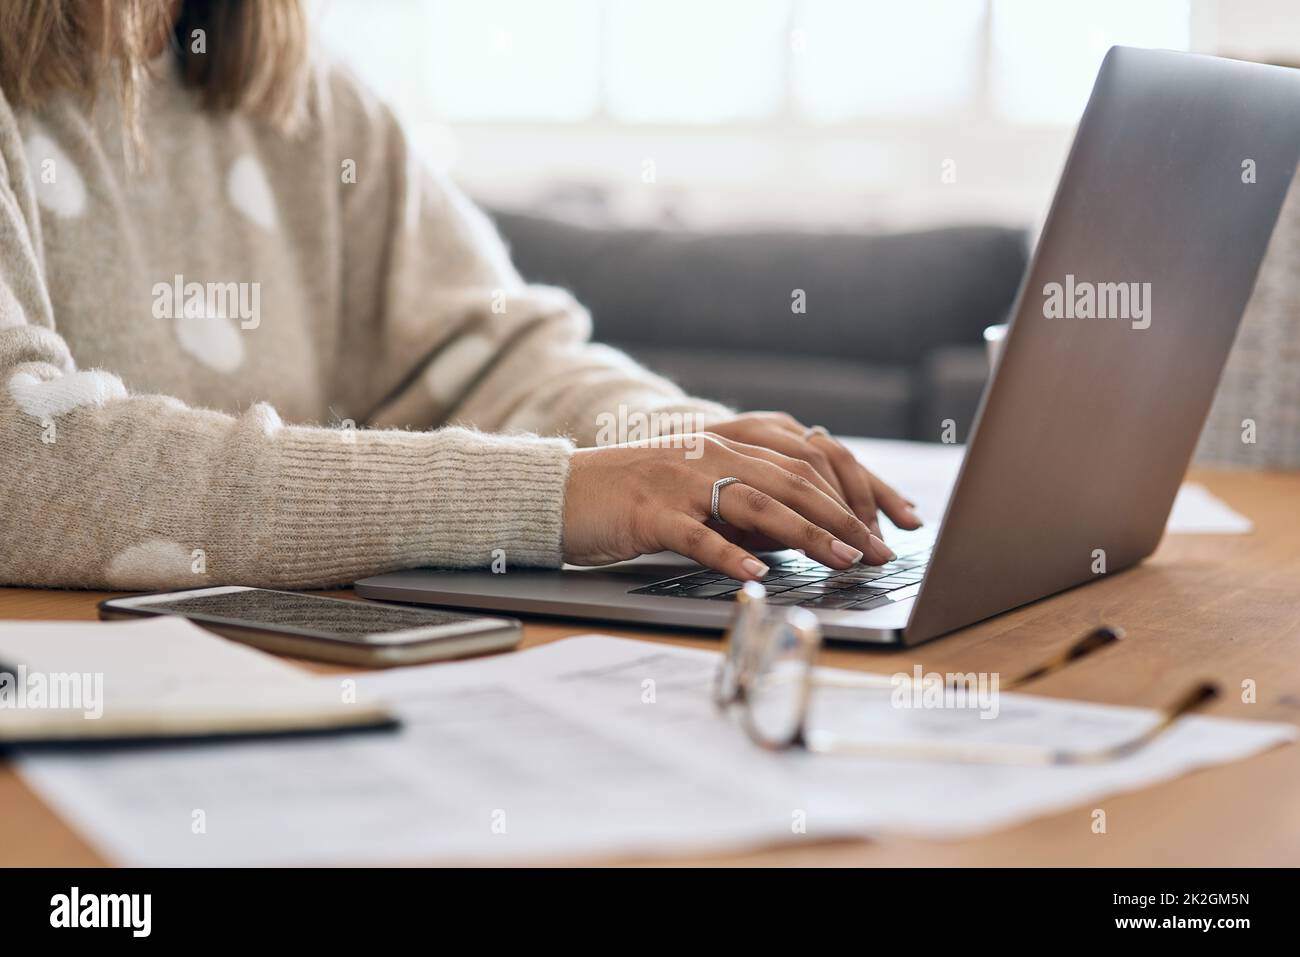 Working towards success one day at a time. Cropped shot of a woman using her laptop while working from home. Stock Photo